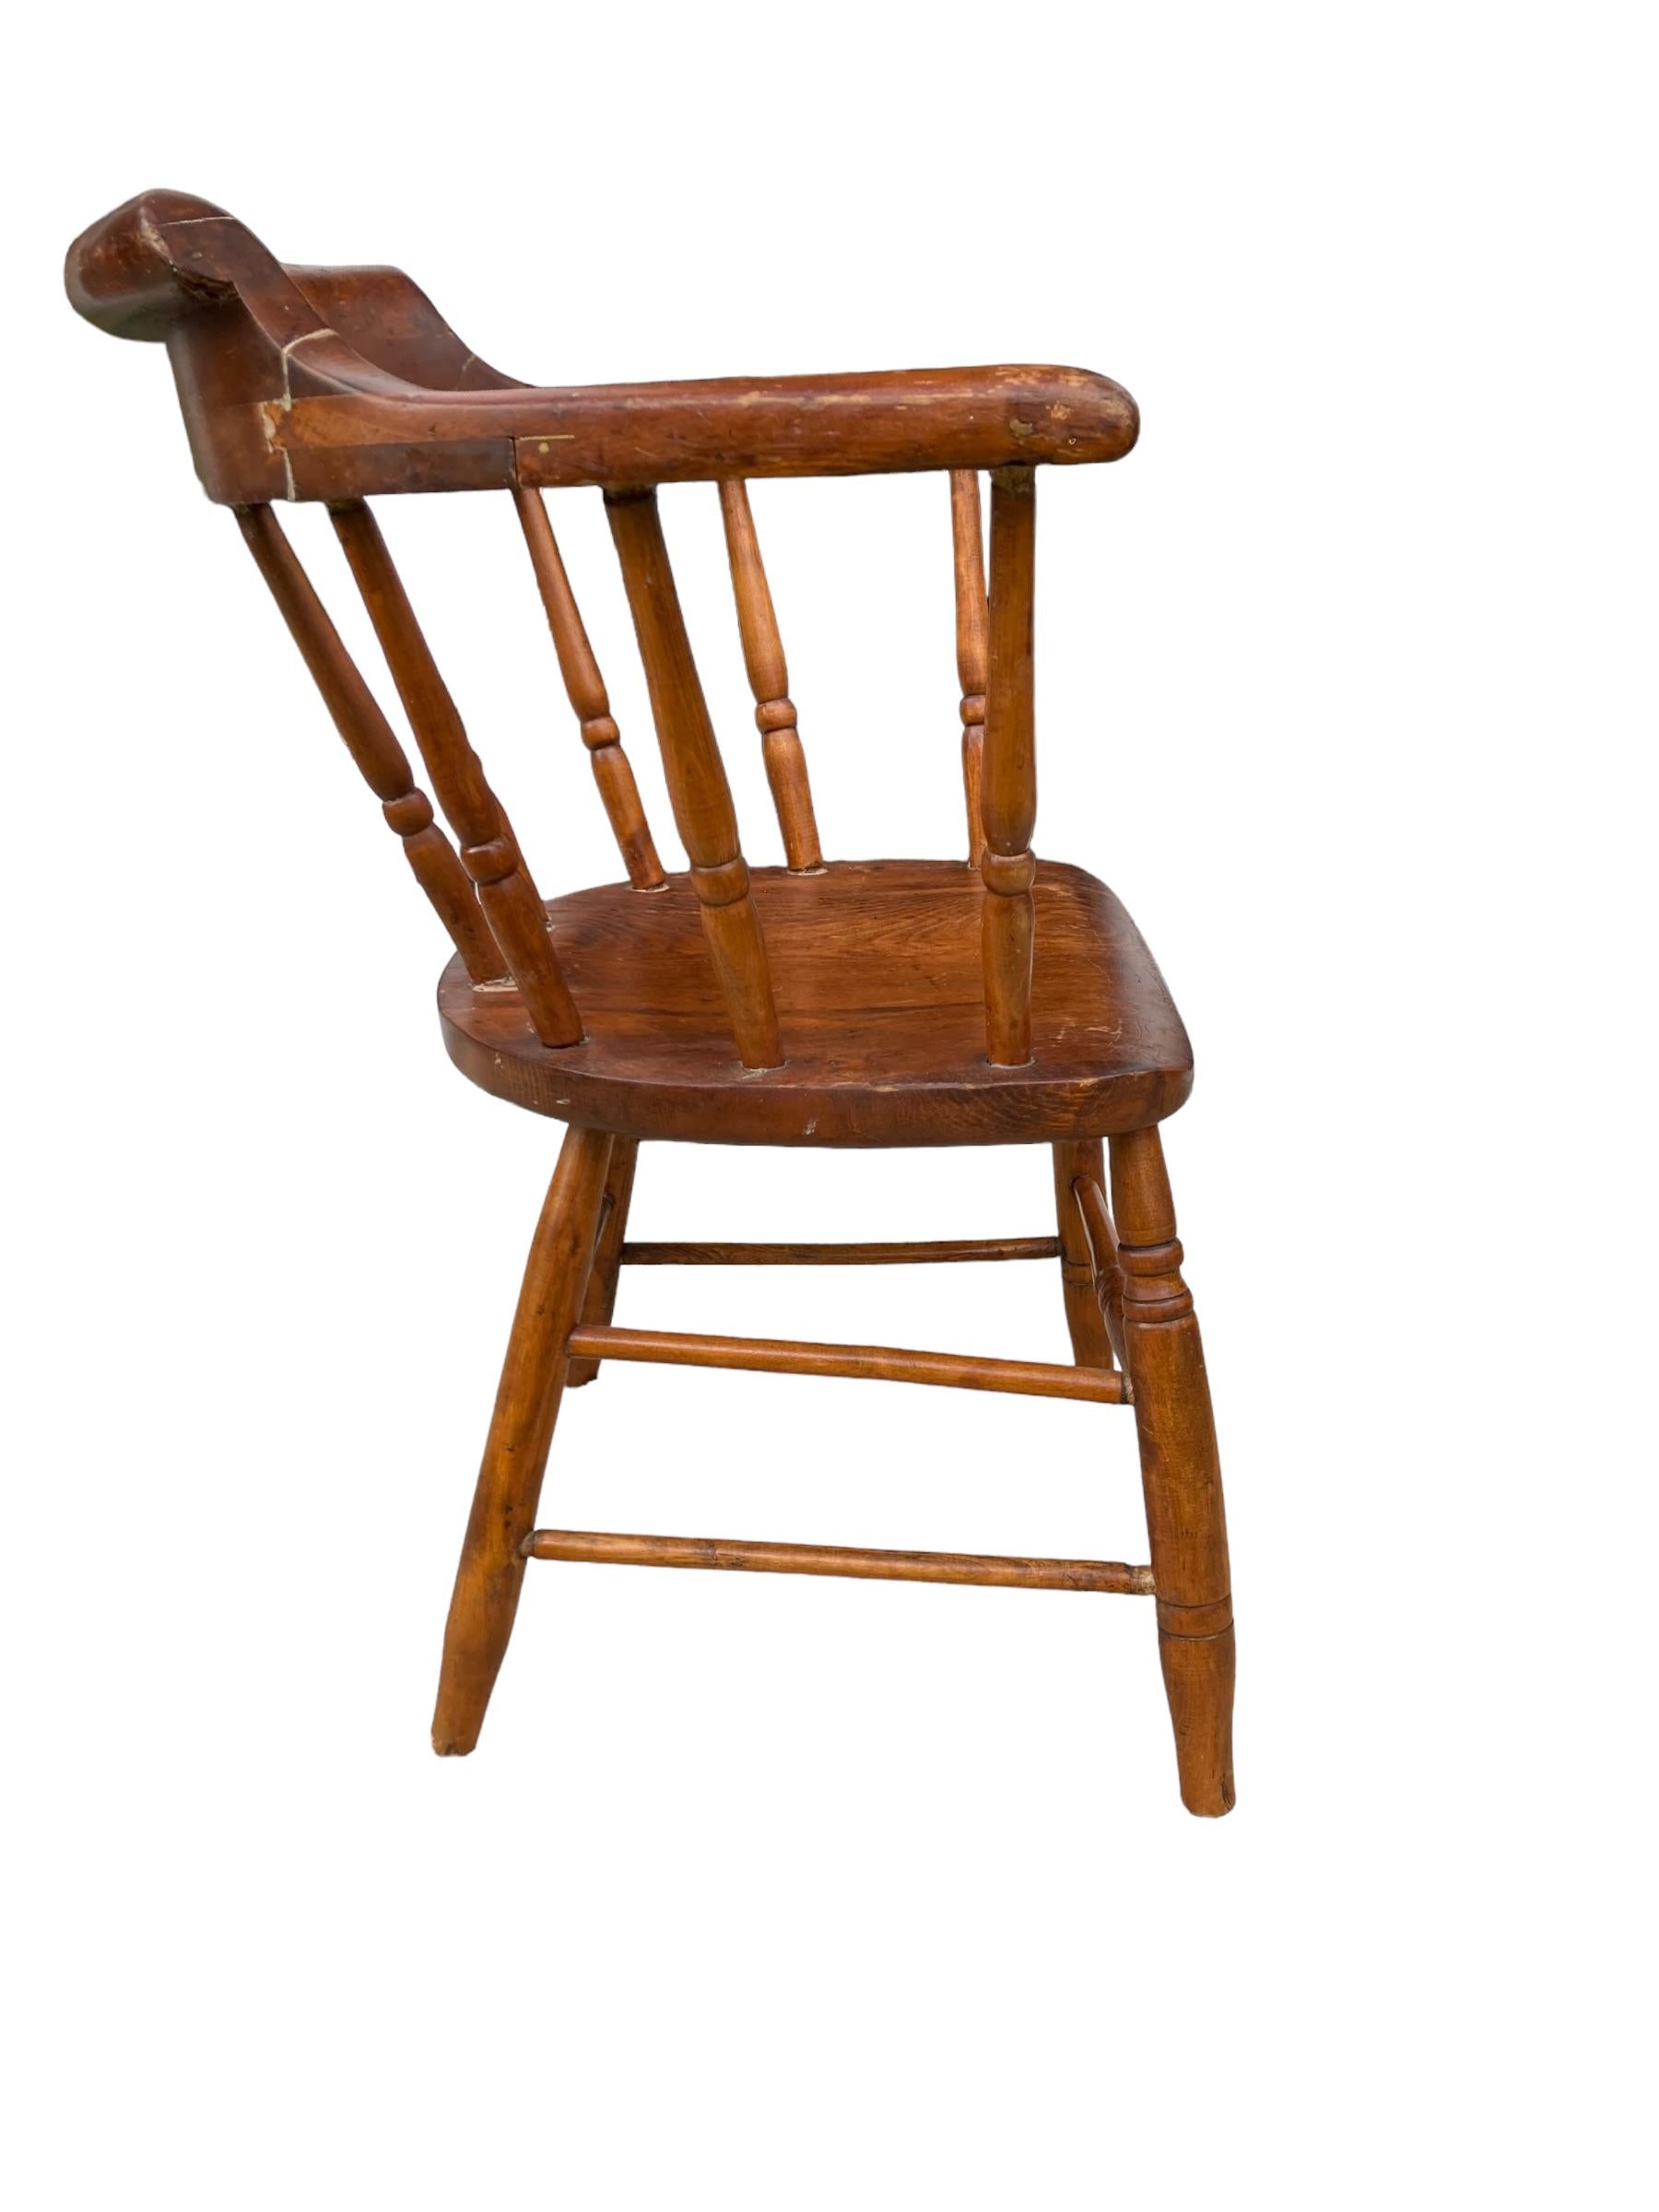 Antique Captains or Smokers Bow back armchair. Made from Beech and Elm this wonderful chair has all original legs and turned spindals with bow back rail. No creaks and charactistic colour and patina. Dated late 1800's. Original and functional